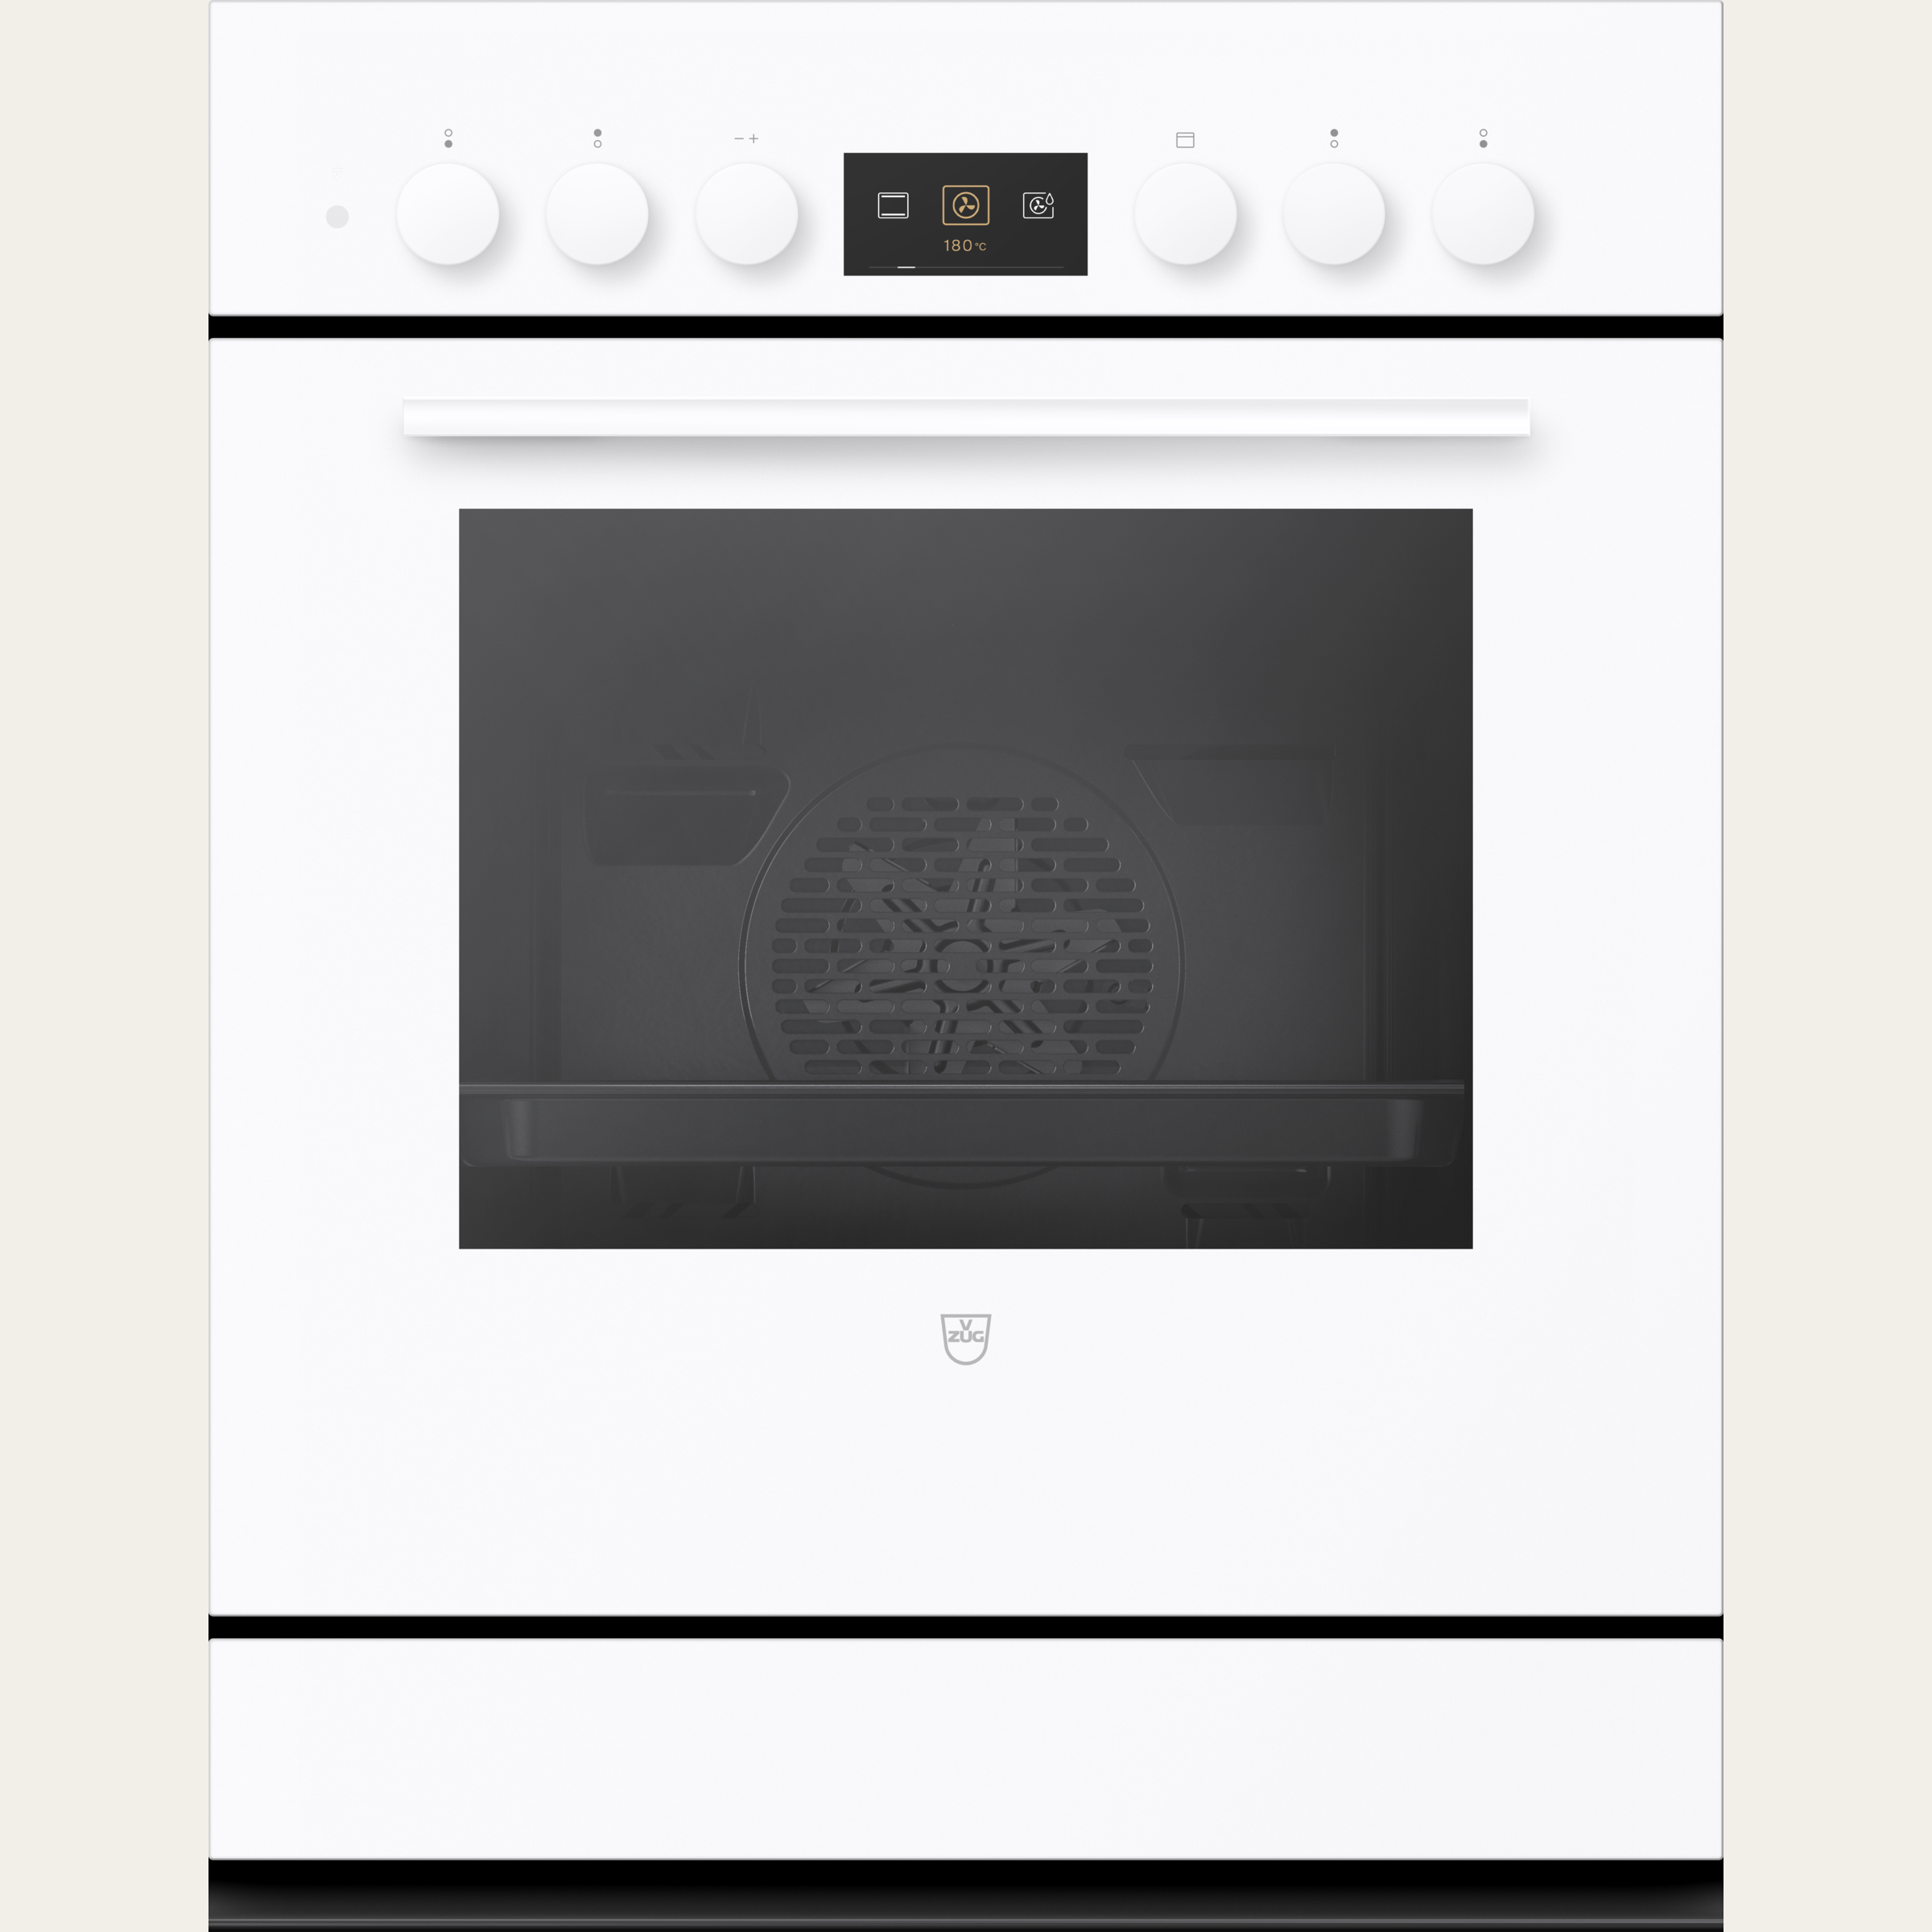 V-ZUG Cooker Combair V600 7UH, Standard width: 60 cm, Standard height: 76.2 cm, White with glass, Handle: white, dial, V-ZUG-Home, Heatable appliance drawer, Number of controllable cooking zones: 4, 400V